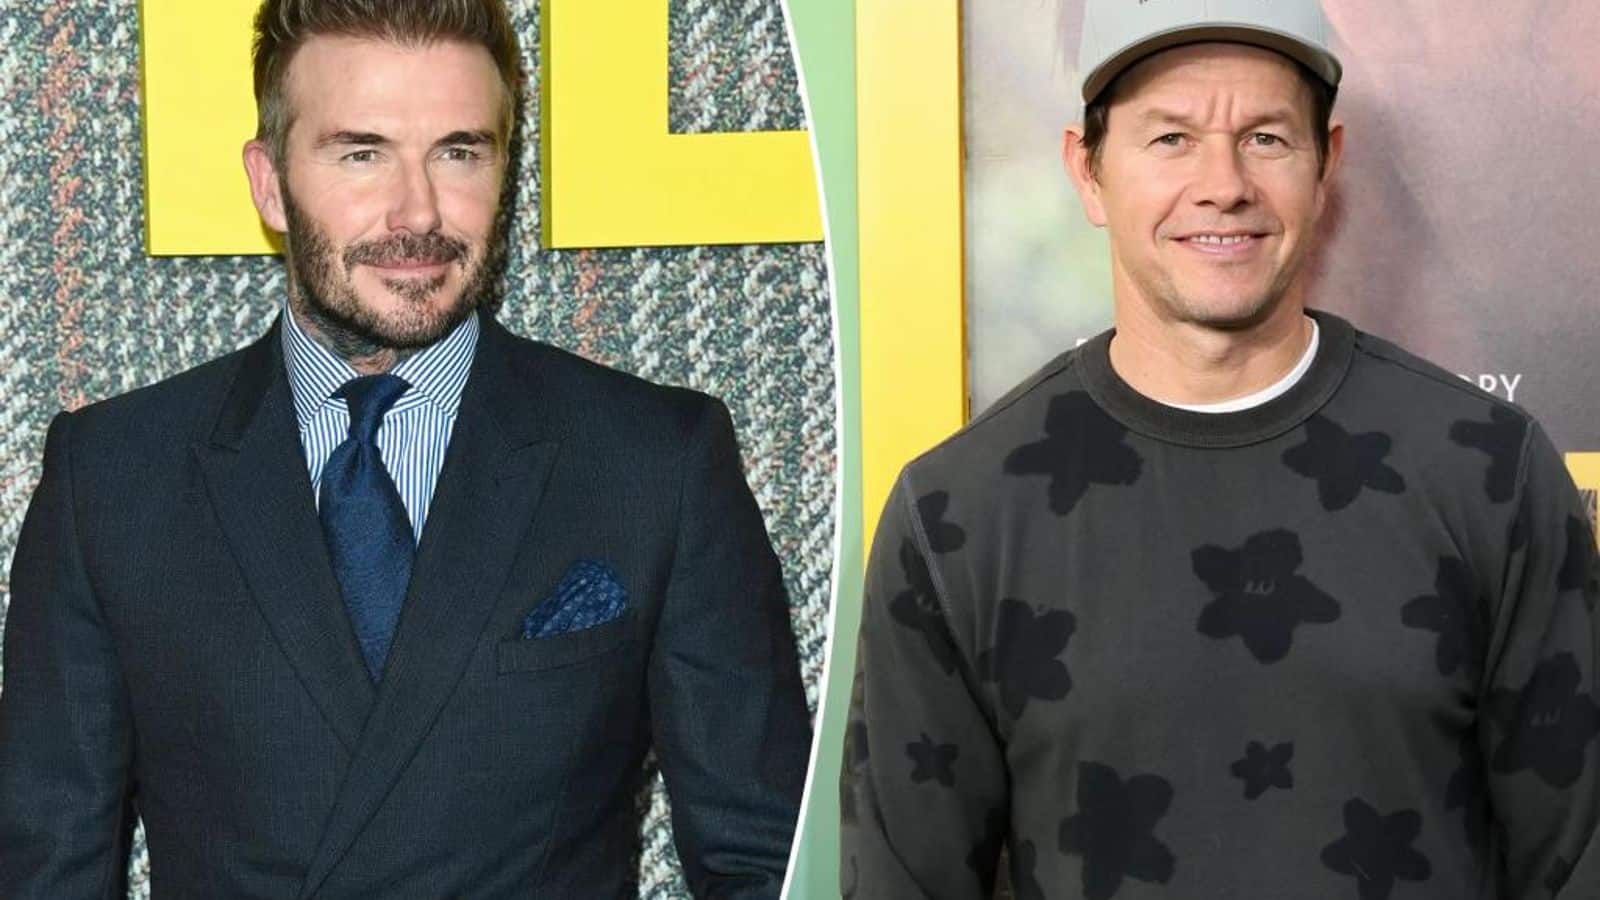 David Beckham sues Mark Wahlberg over $10M fitness deal loss